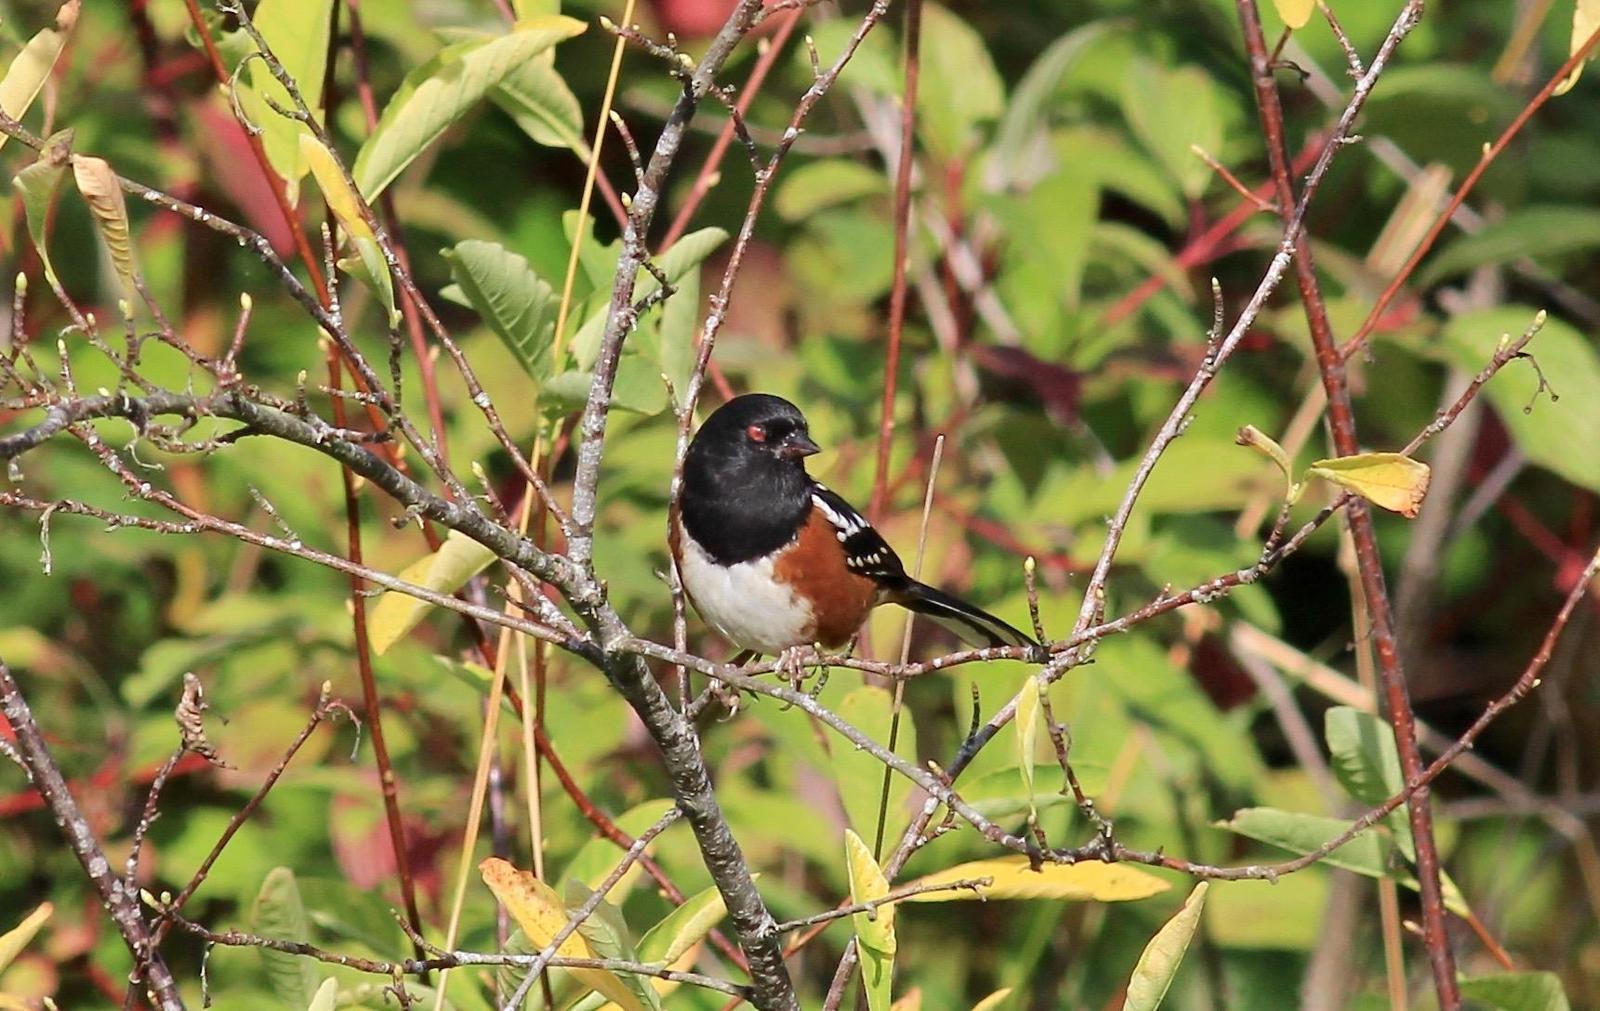 Spotted Towhee Photo by Kathryn Keith